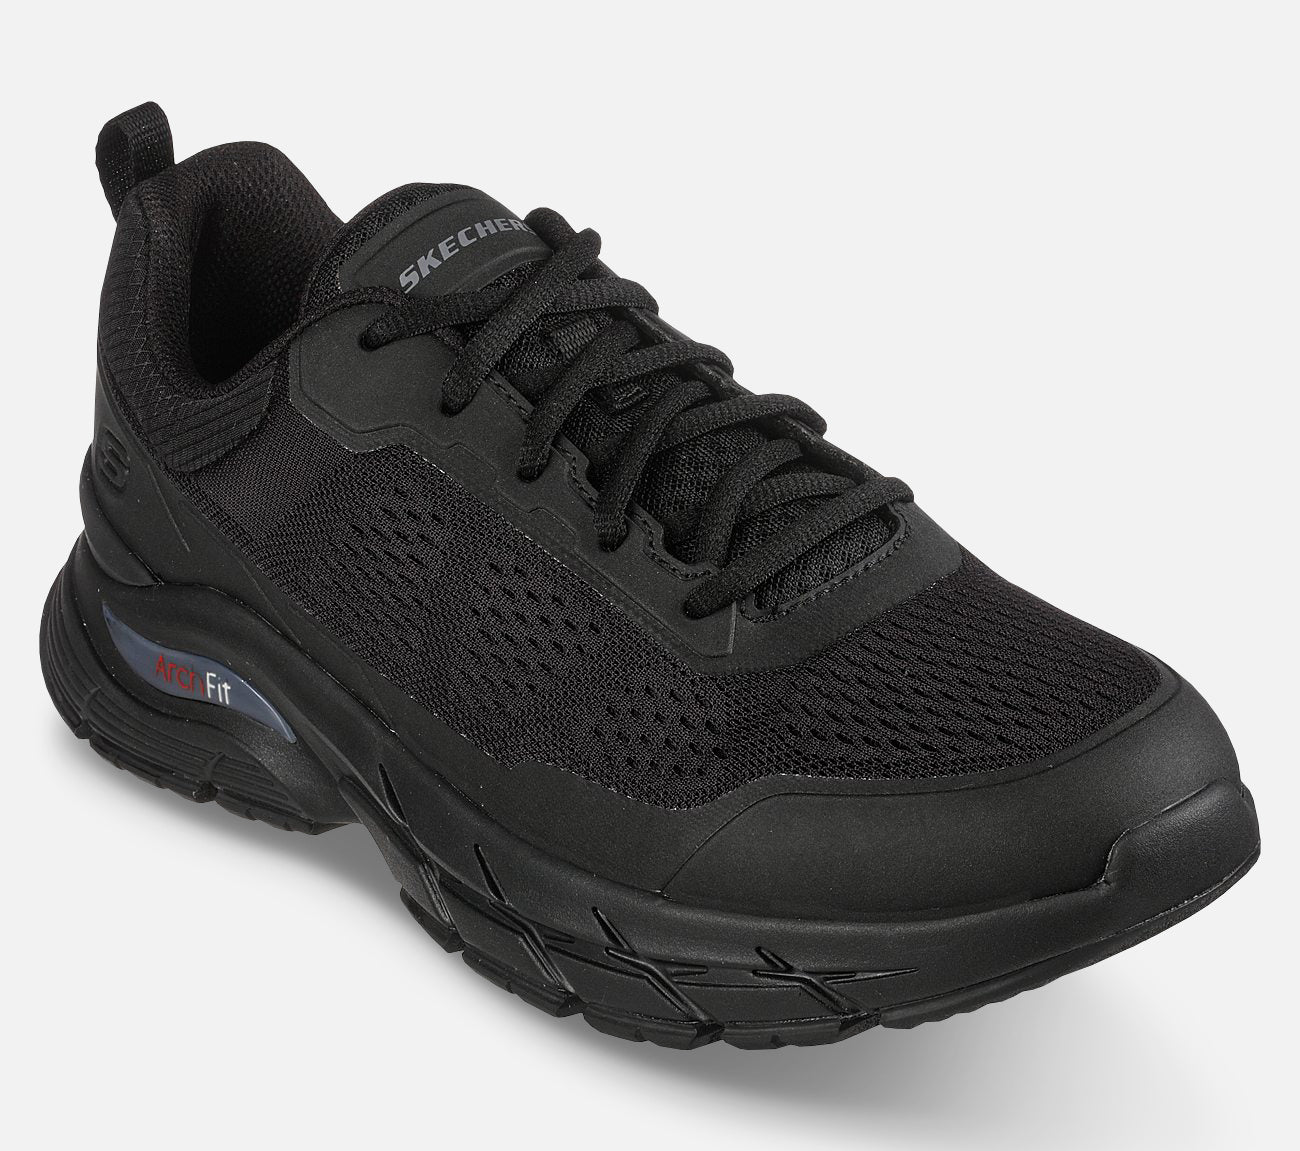 Arch Fit Baxter - Pendroy Shoe Skechers